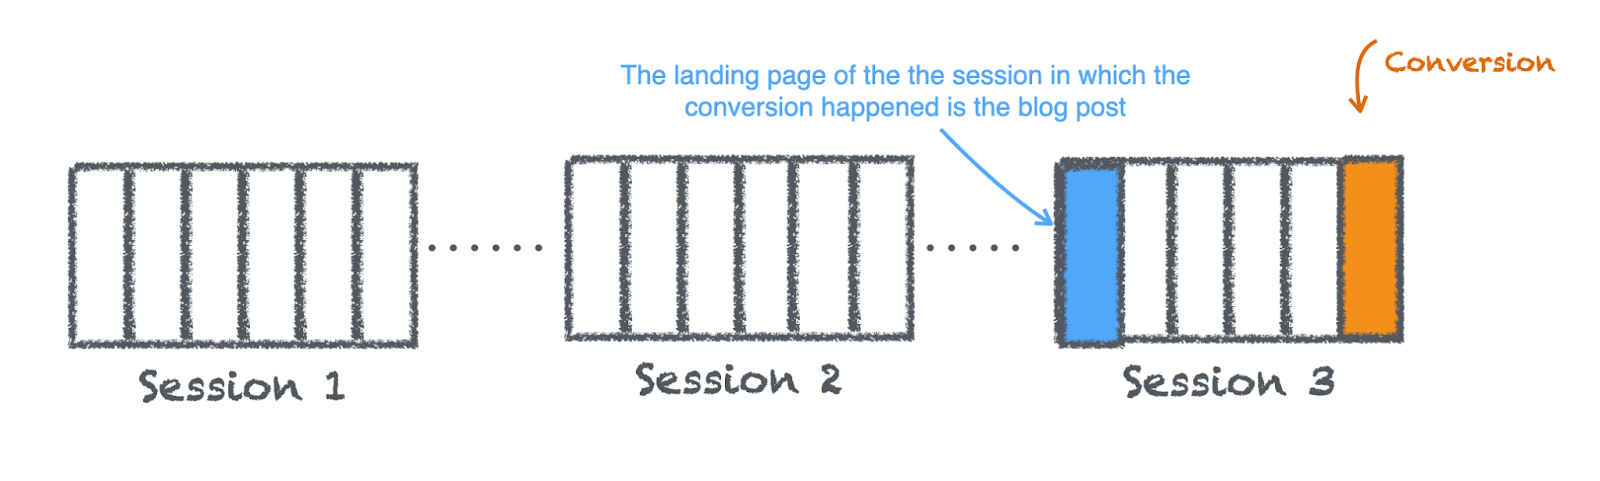 The landing page of the session in which the conversion happened in the blog post vs the conversion.